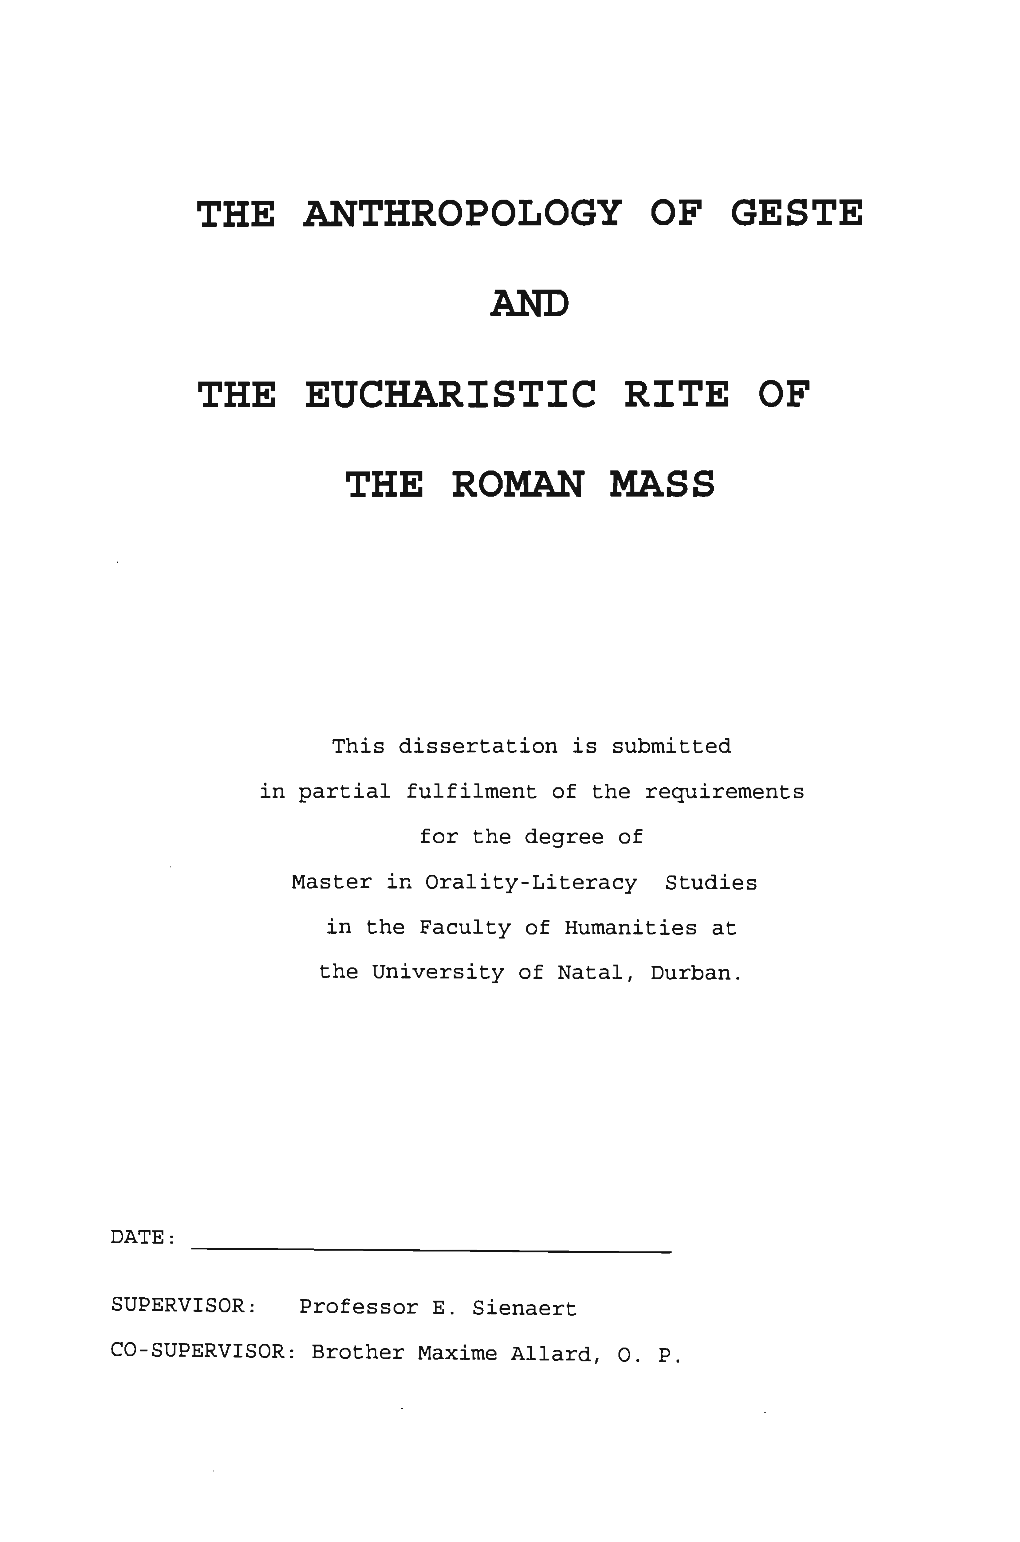 The Anthropology of Geste the Eucharistic Rite of The